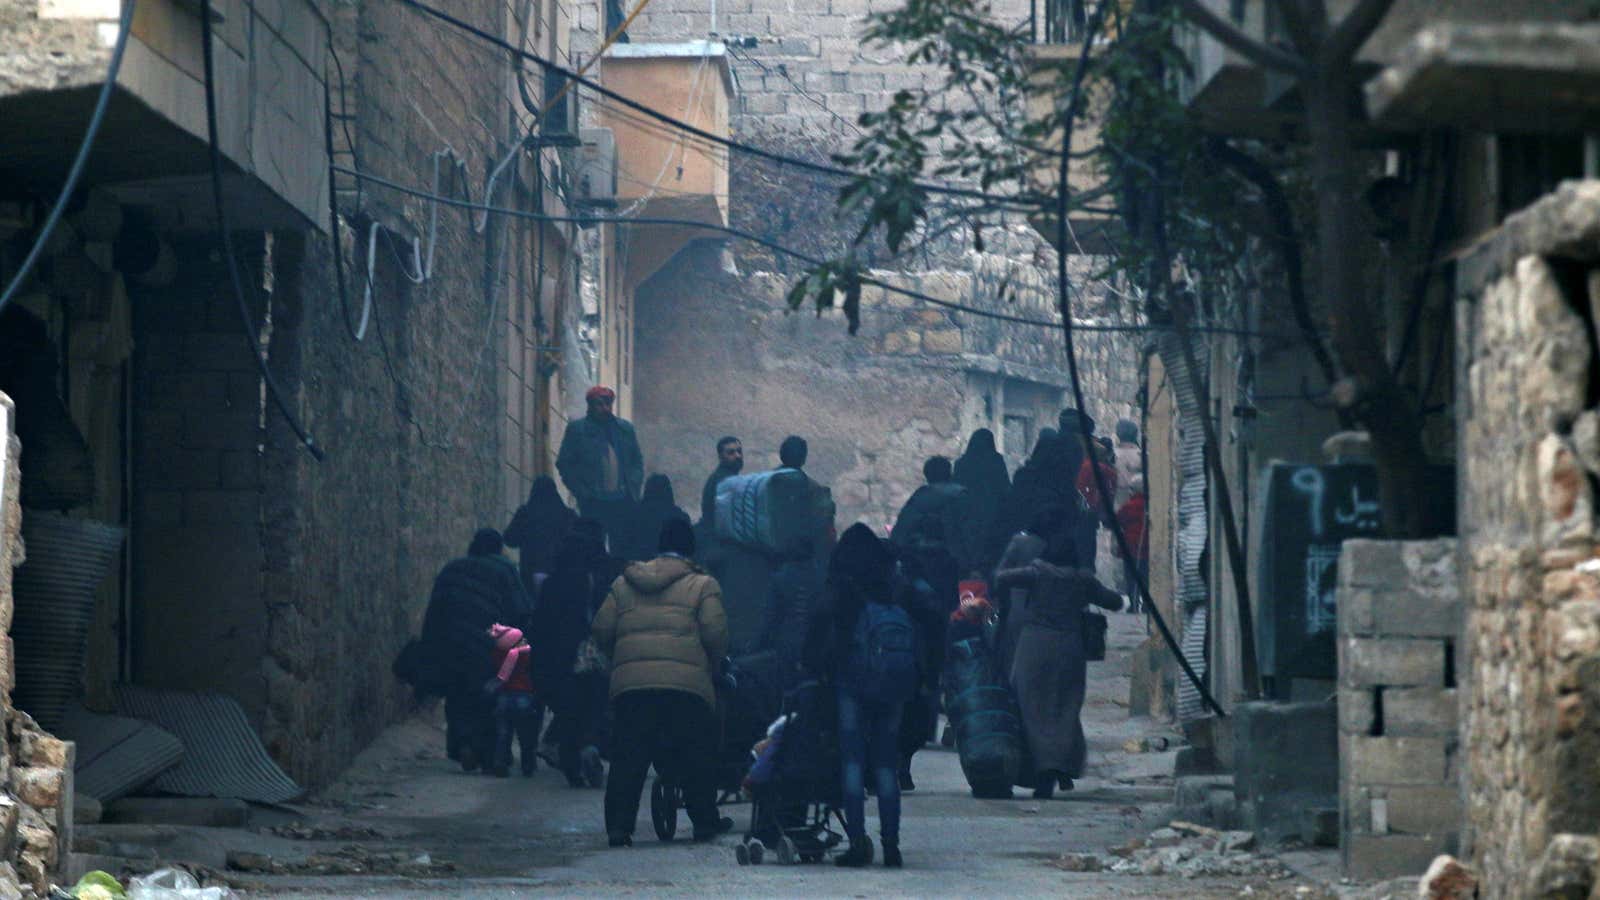 People carry belongings as they flee deeper into the remaining rebel-held areas.